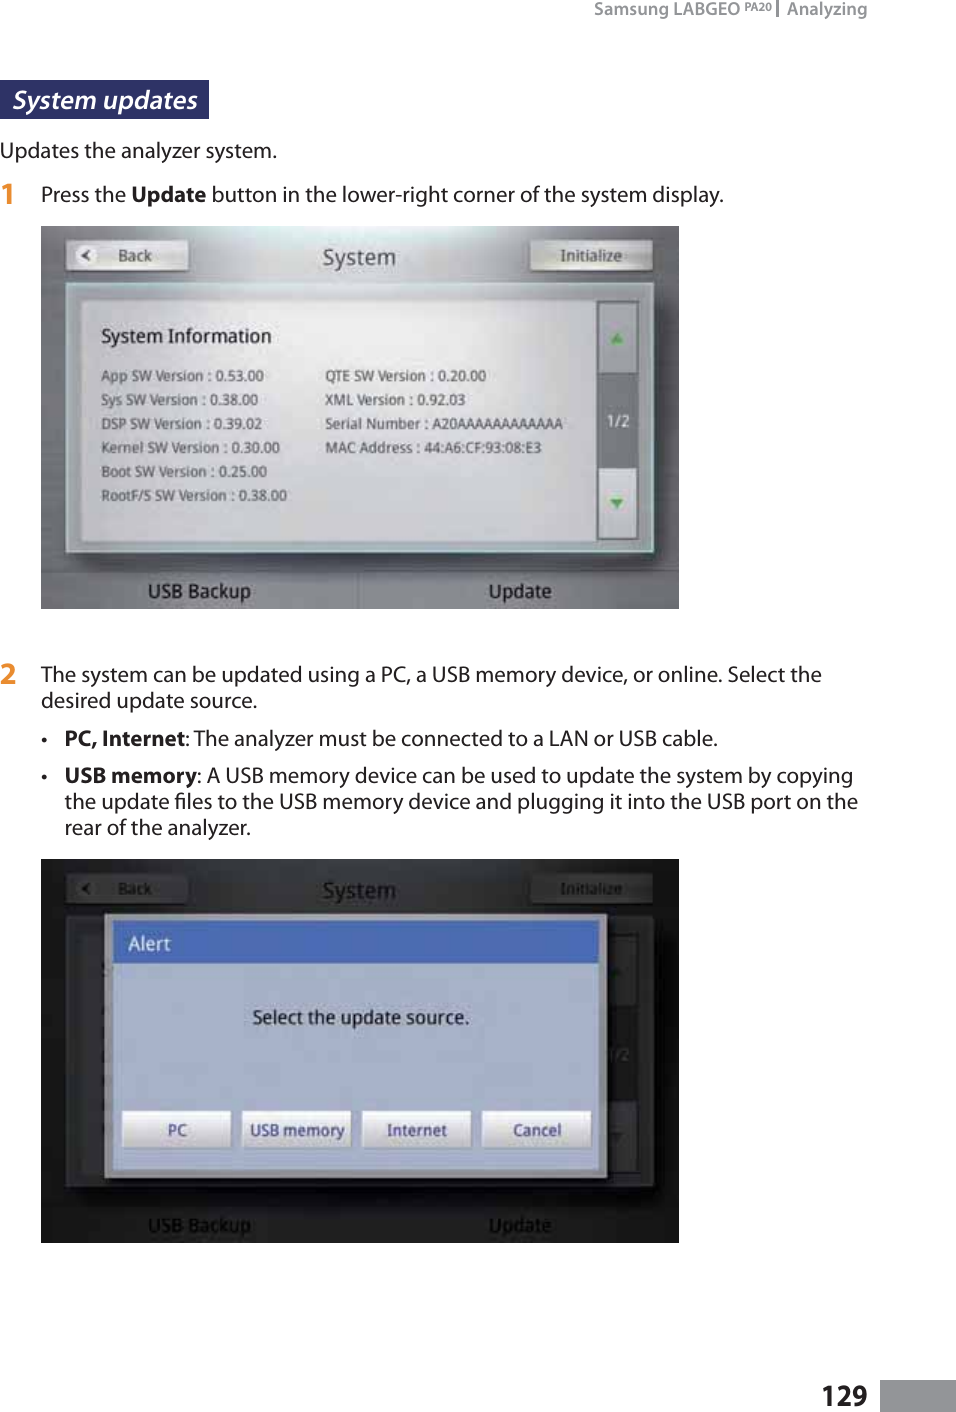 129Samsung LABGEO PA20   AnalyzingSystem updates Updates the analyzer system.1  Press the Update button in the lower-right corner of the system display.2  The system can be updated using a PC, a USB memory device, or online. Select the desired update source.t PC, Internet: The analyzer must be connected to a LAN or USB cable.t USB memory: A USB memory device can be used to update the system by copying the update les to the USB memory device and plugging it into the USB port on the rear of the analyzer.